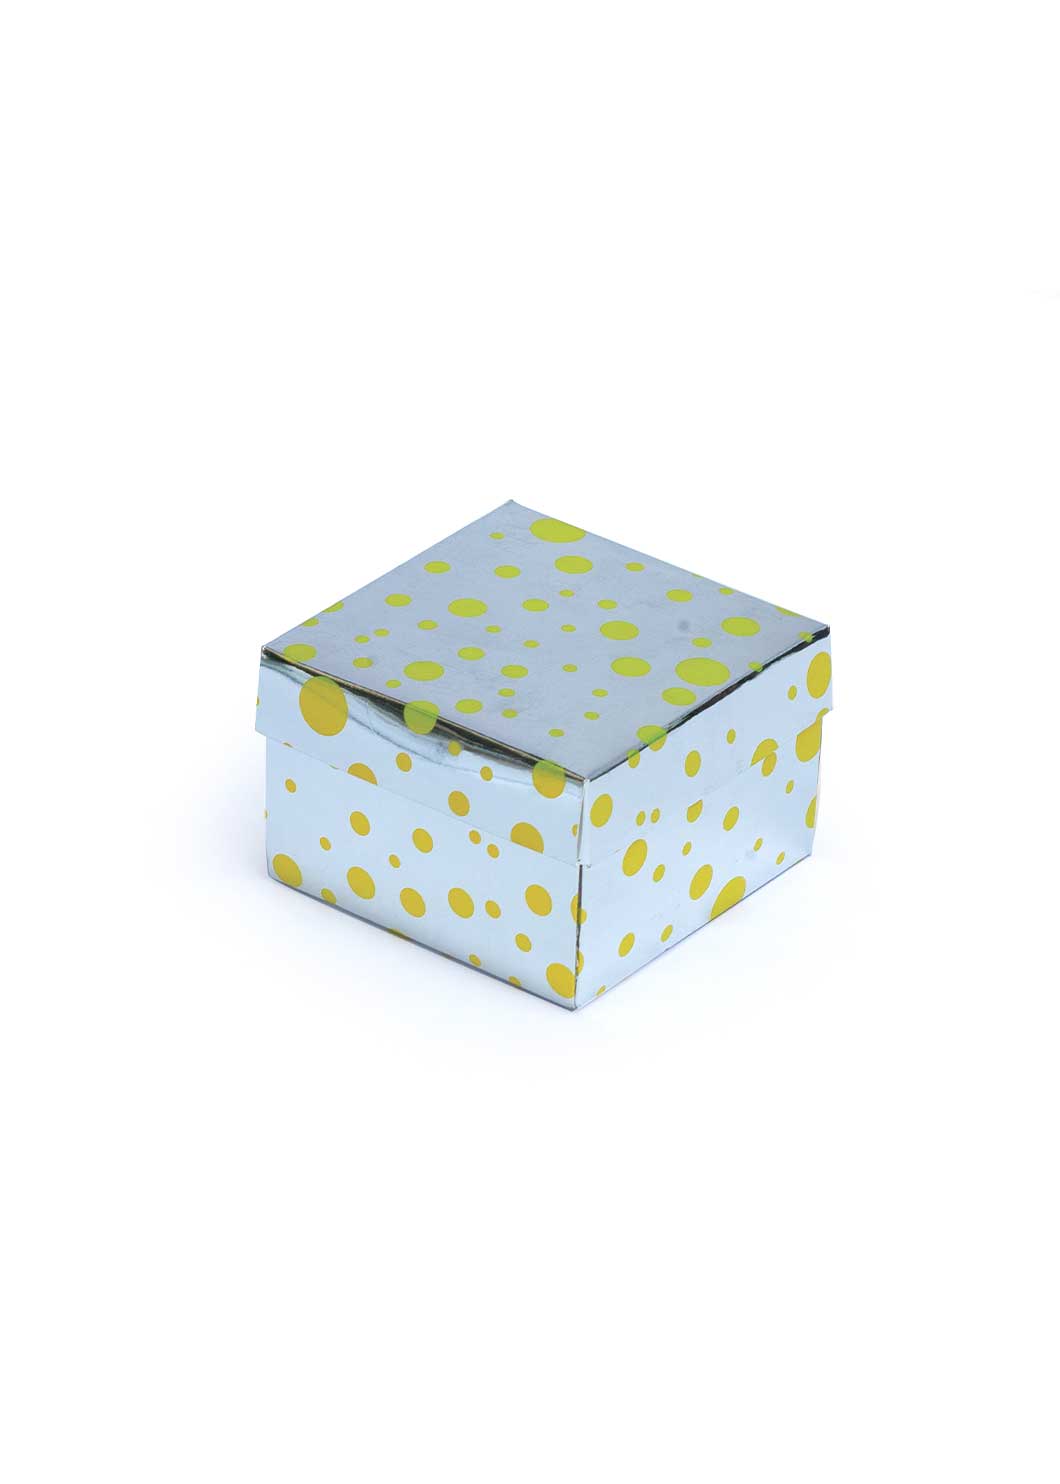 Plain Block Dotted Shine Design Box for Packing - Shiny Gift Box - Silver Gift Box